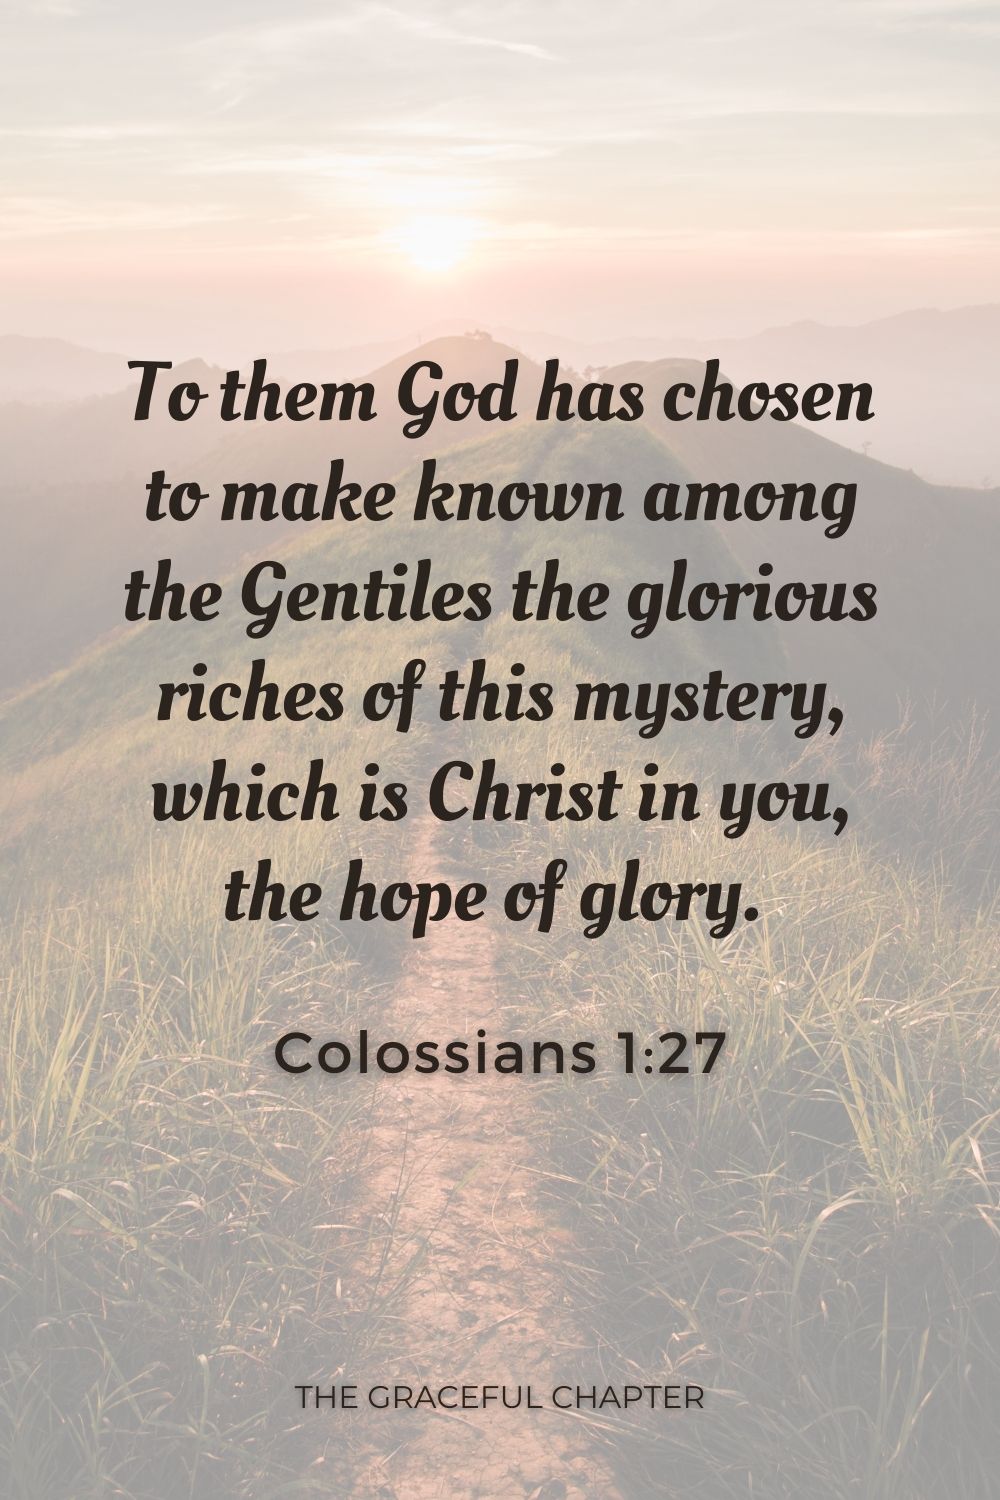 To them God has chosen to make known among the Gentiles the glorious riches of this mystery, which is Christ in you, the hope of gloryTo them God has chosen to make known among the Gentiles the glorious riches of this mystery, which is Christ in you, the hope of glory.  Colossians 1:27